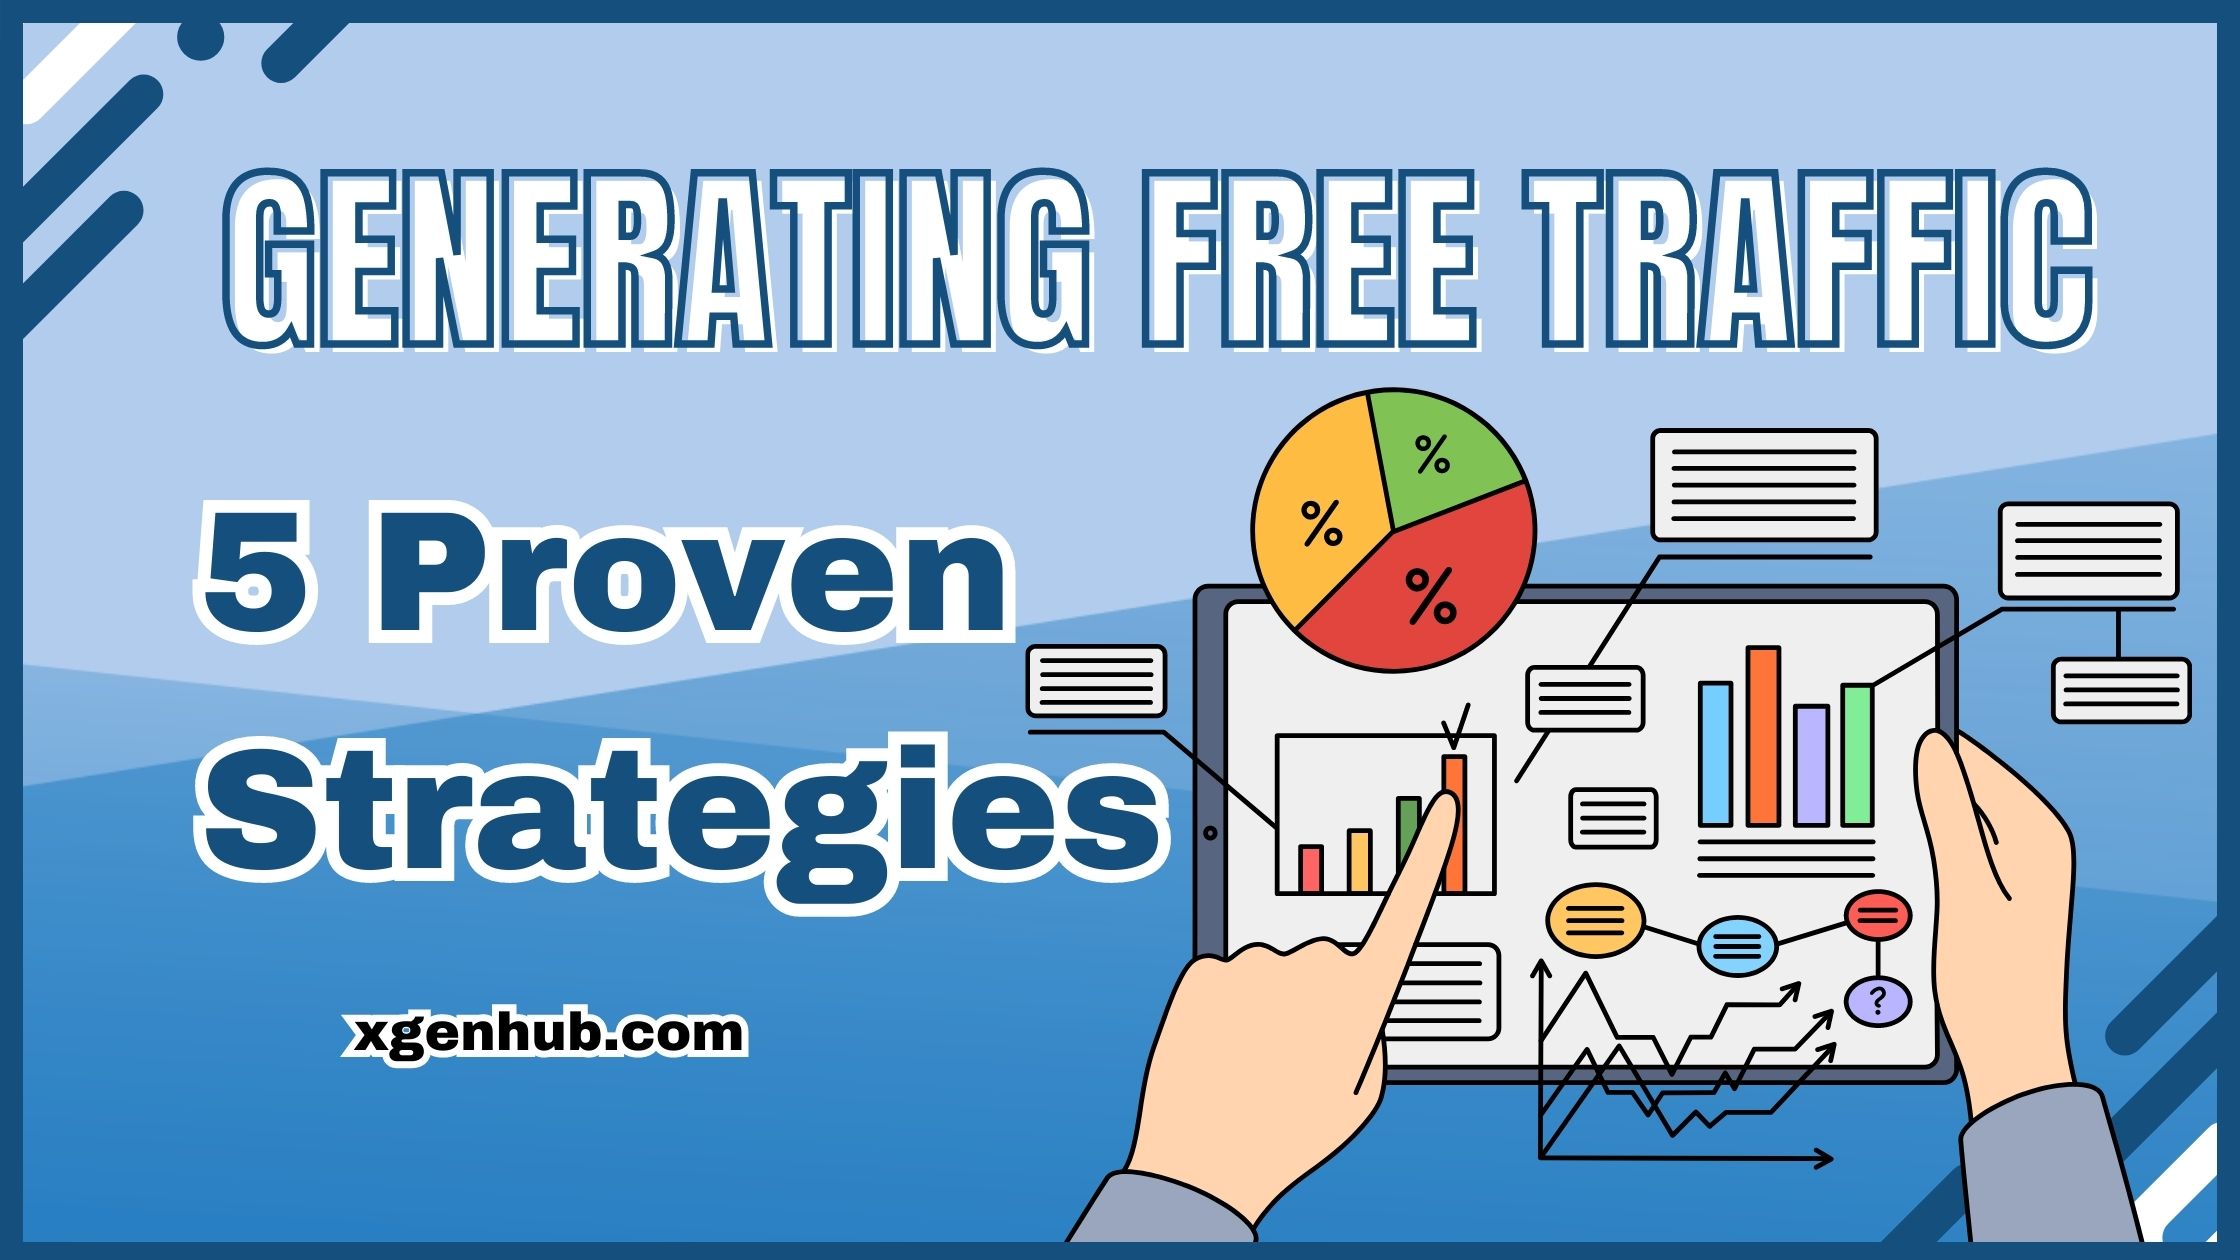 5 Proven Strategies for Generating Free Traffic to Your Website